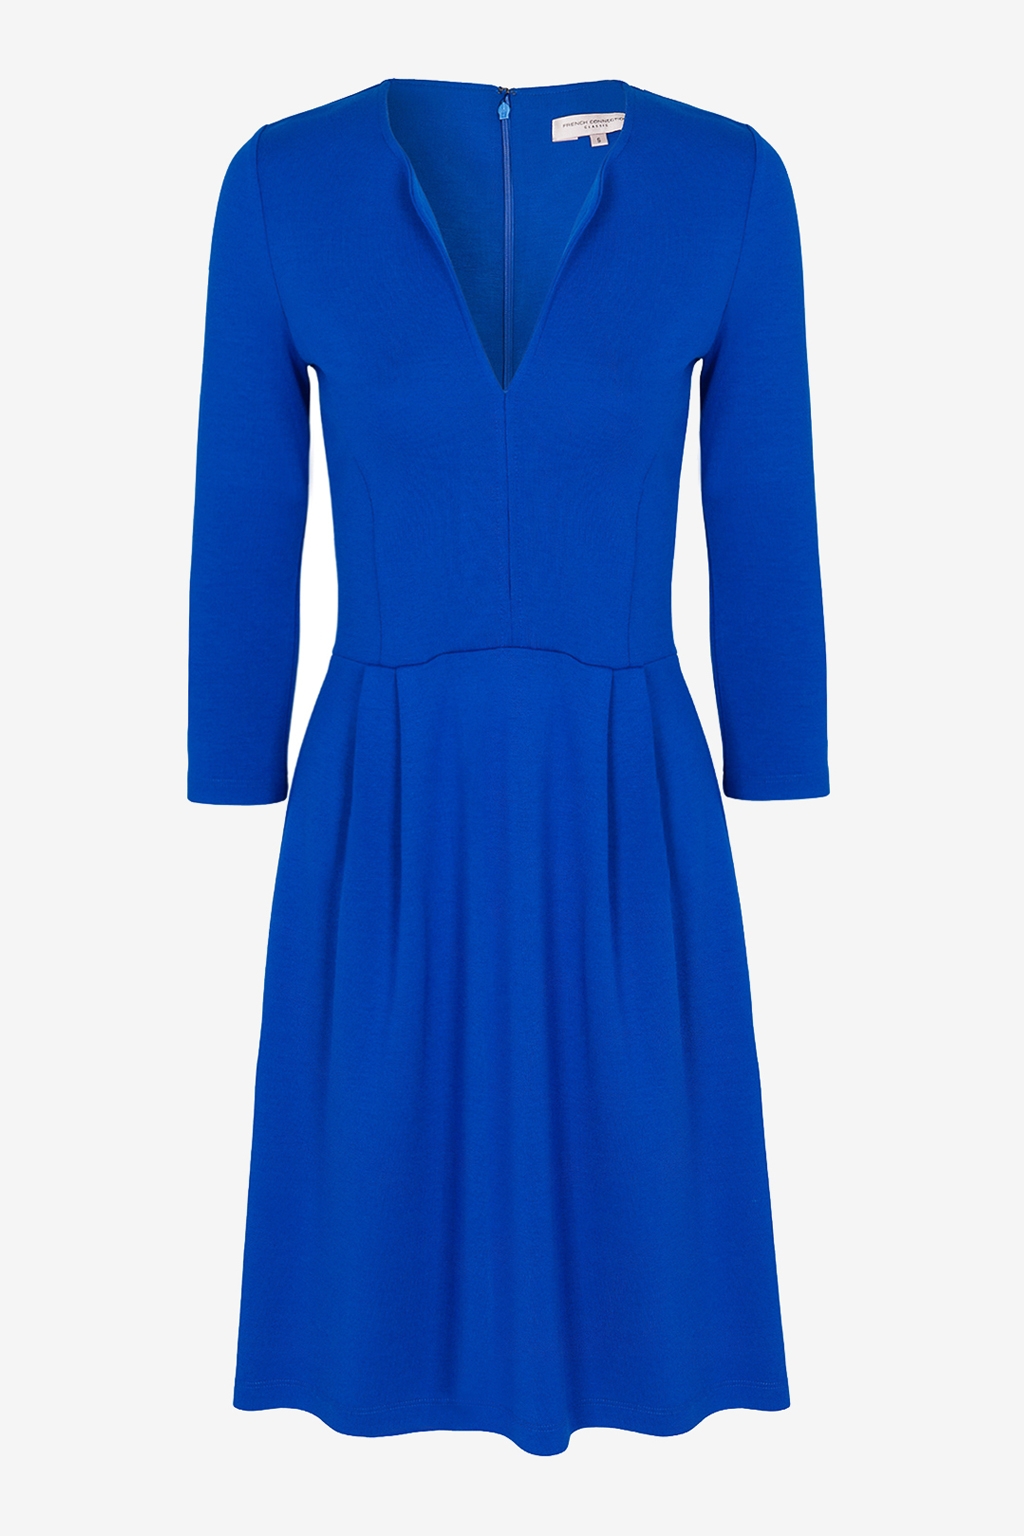 French connection Classic Edie Viscose Jersey Dress in Blue (Electric ...